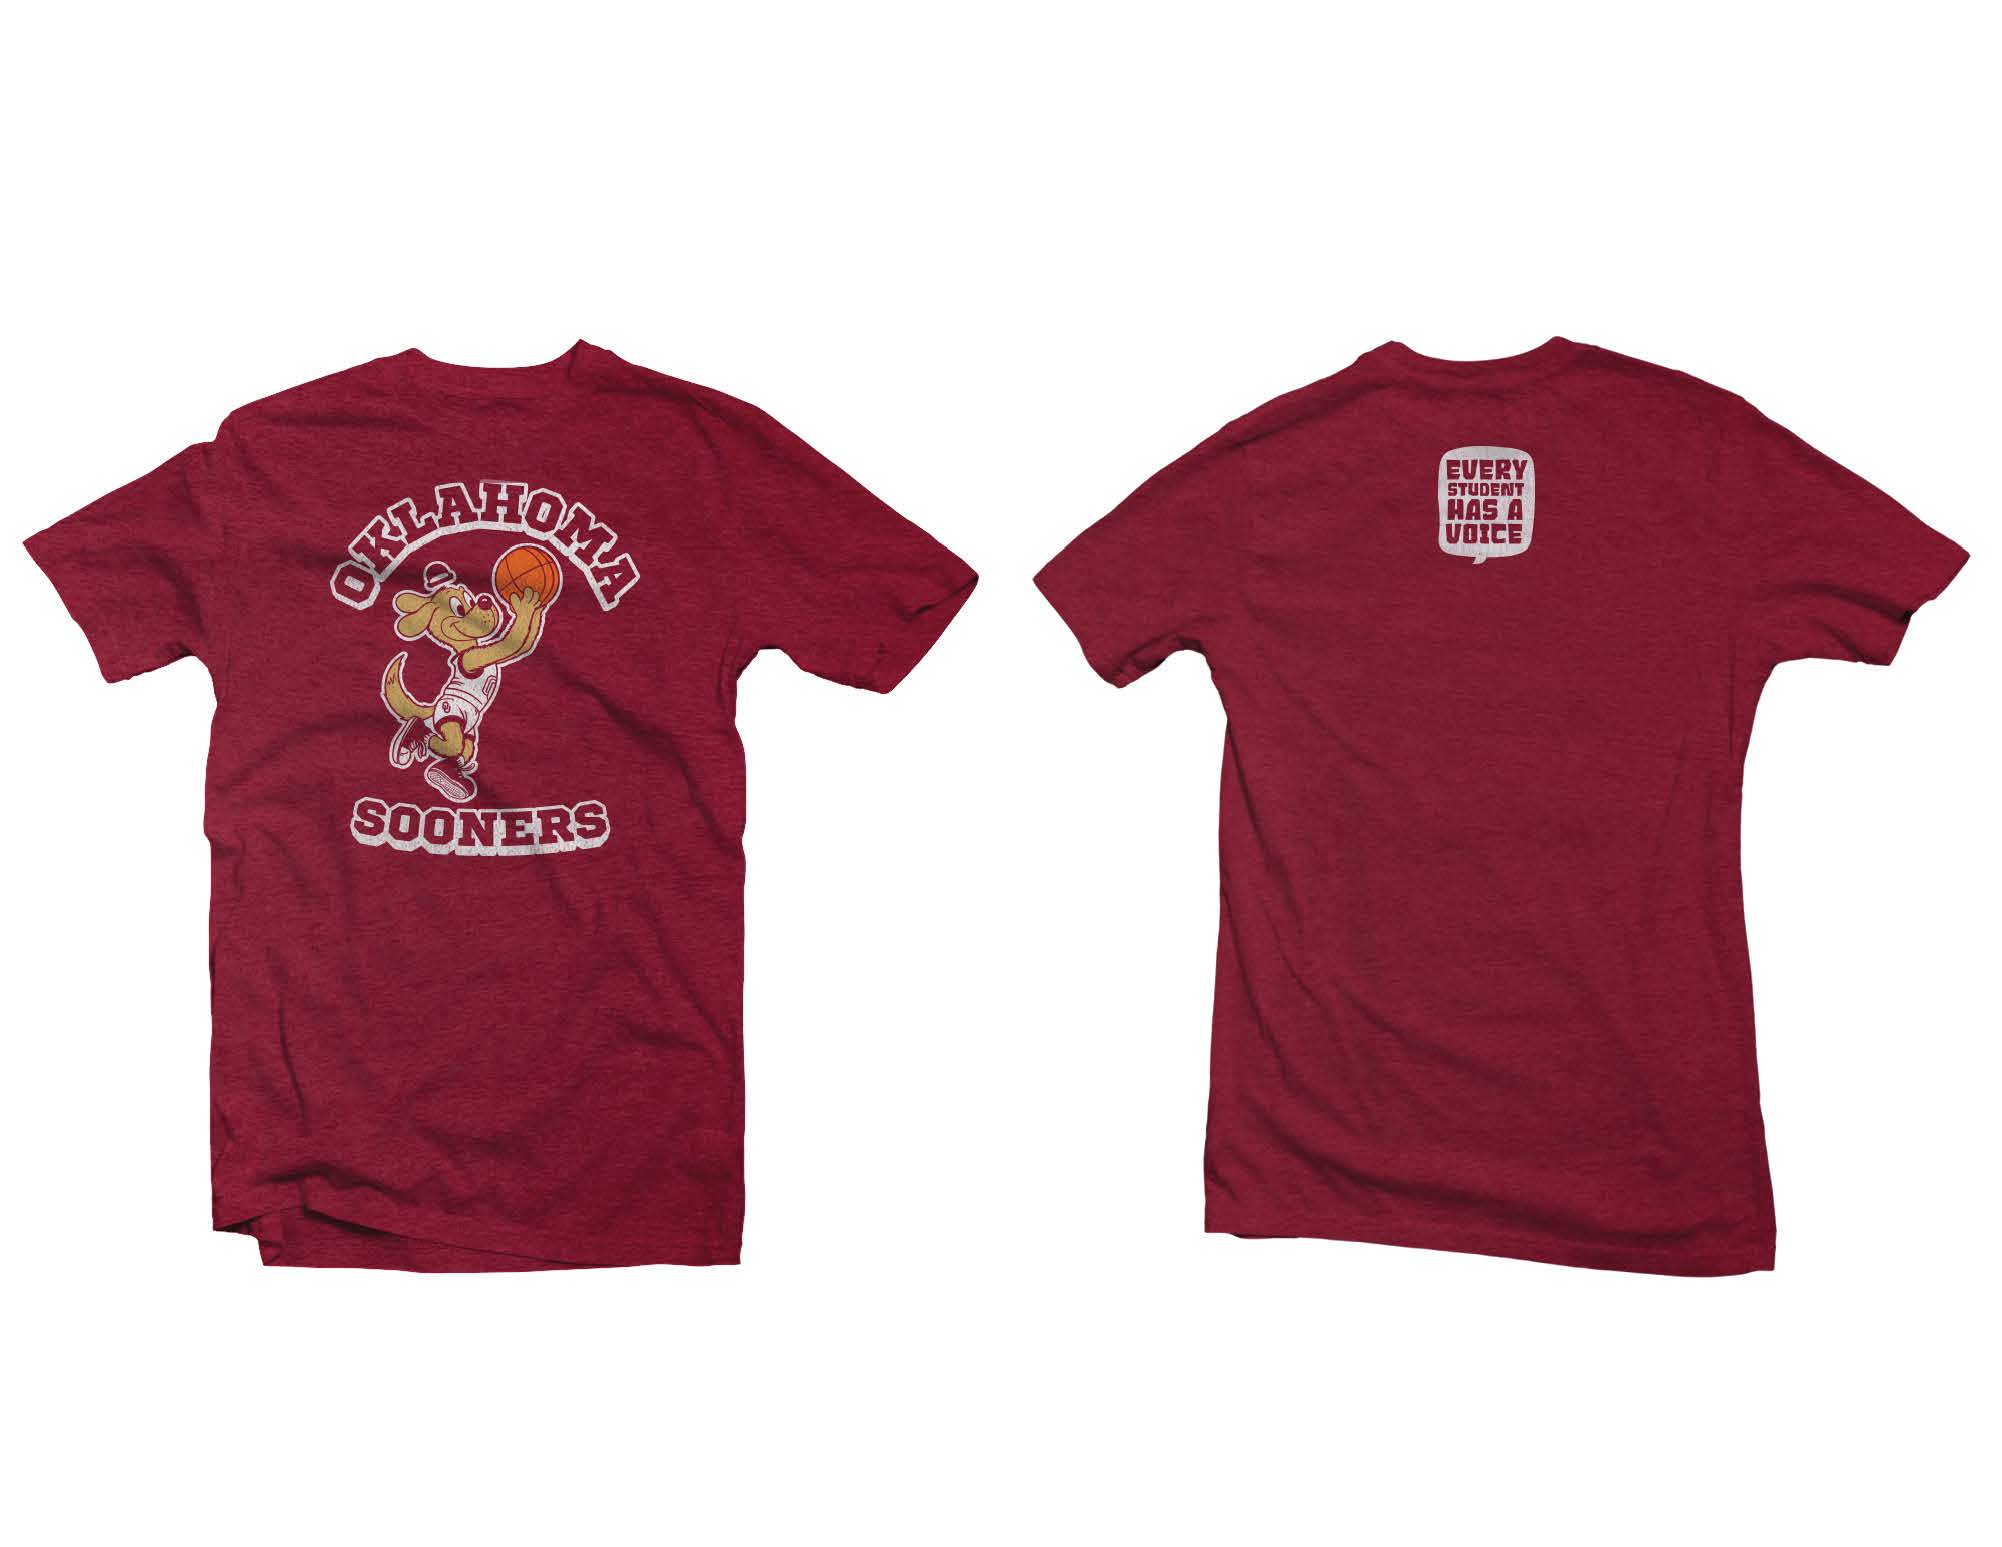 Limited edition T-shirt that says Oklahoma Sooners and featuring a basketball mascot.